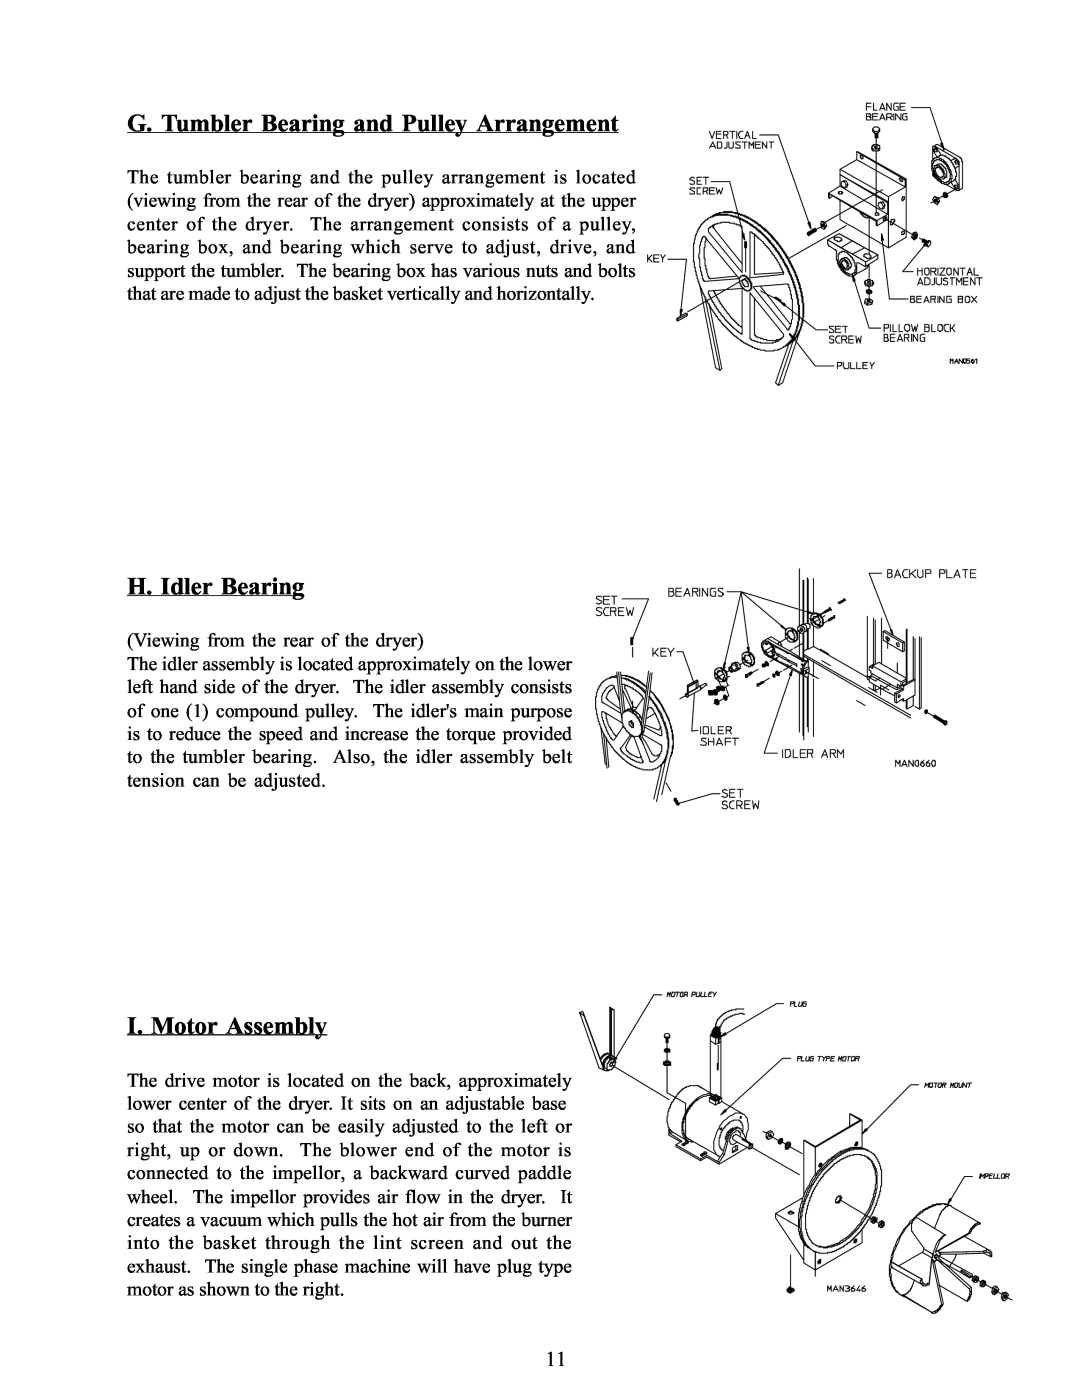 American Dryer Corp WDA-385 service manual G. Tumbler Bearing and Pulley Arrangement, H. Idler Bearing, I. Motor Assembly 